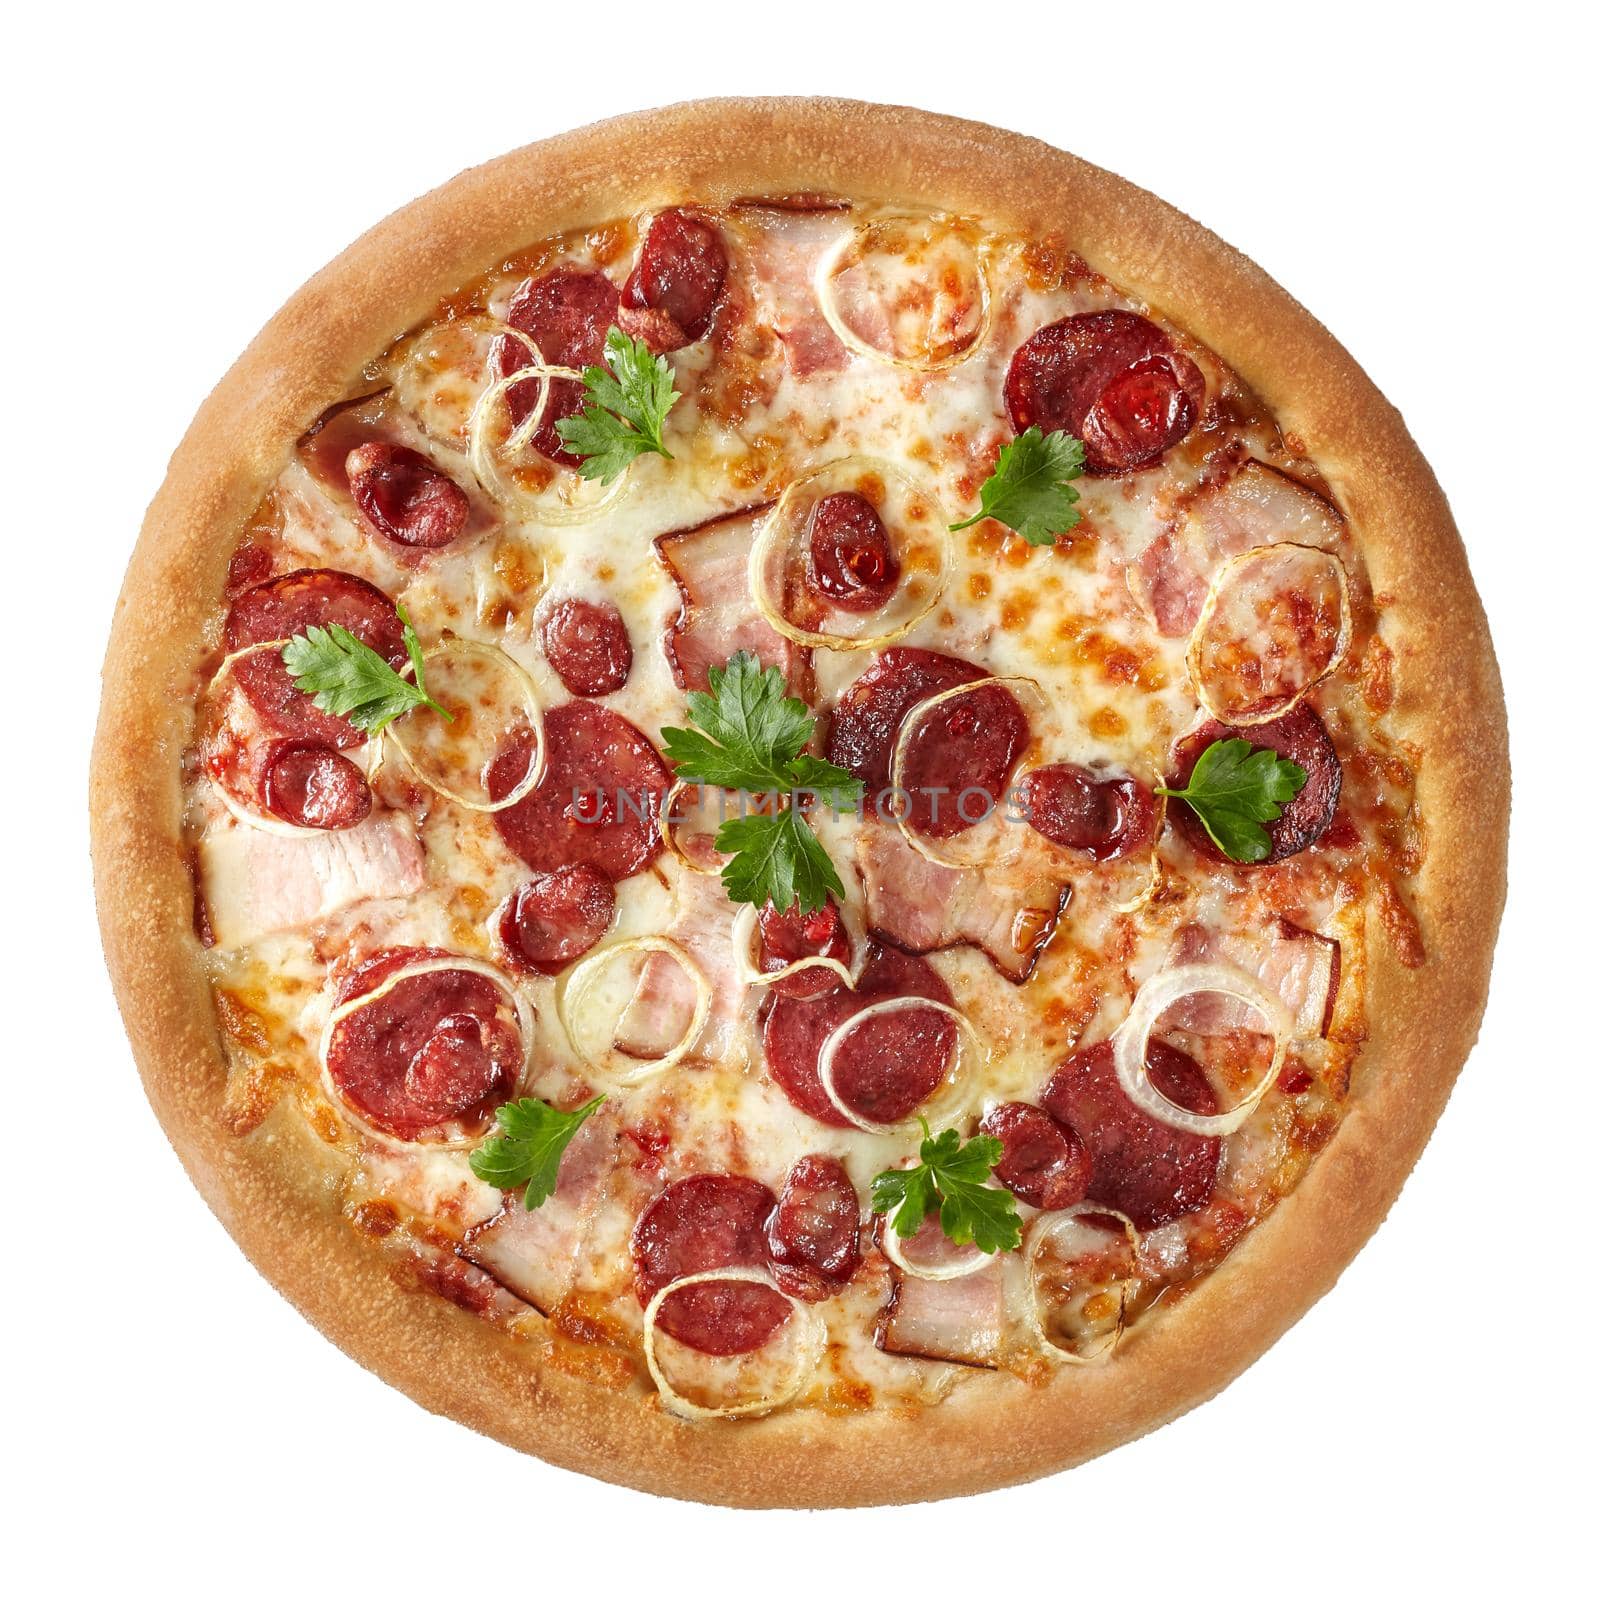 Top view of popular browned pizza with bacon, salami, hunting sausages and onions on layer of pelati sauce and melted mozzarella garnished with fresh greens isolated on white background